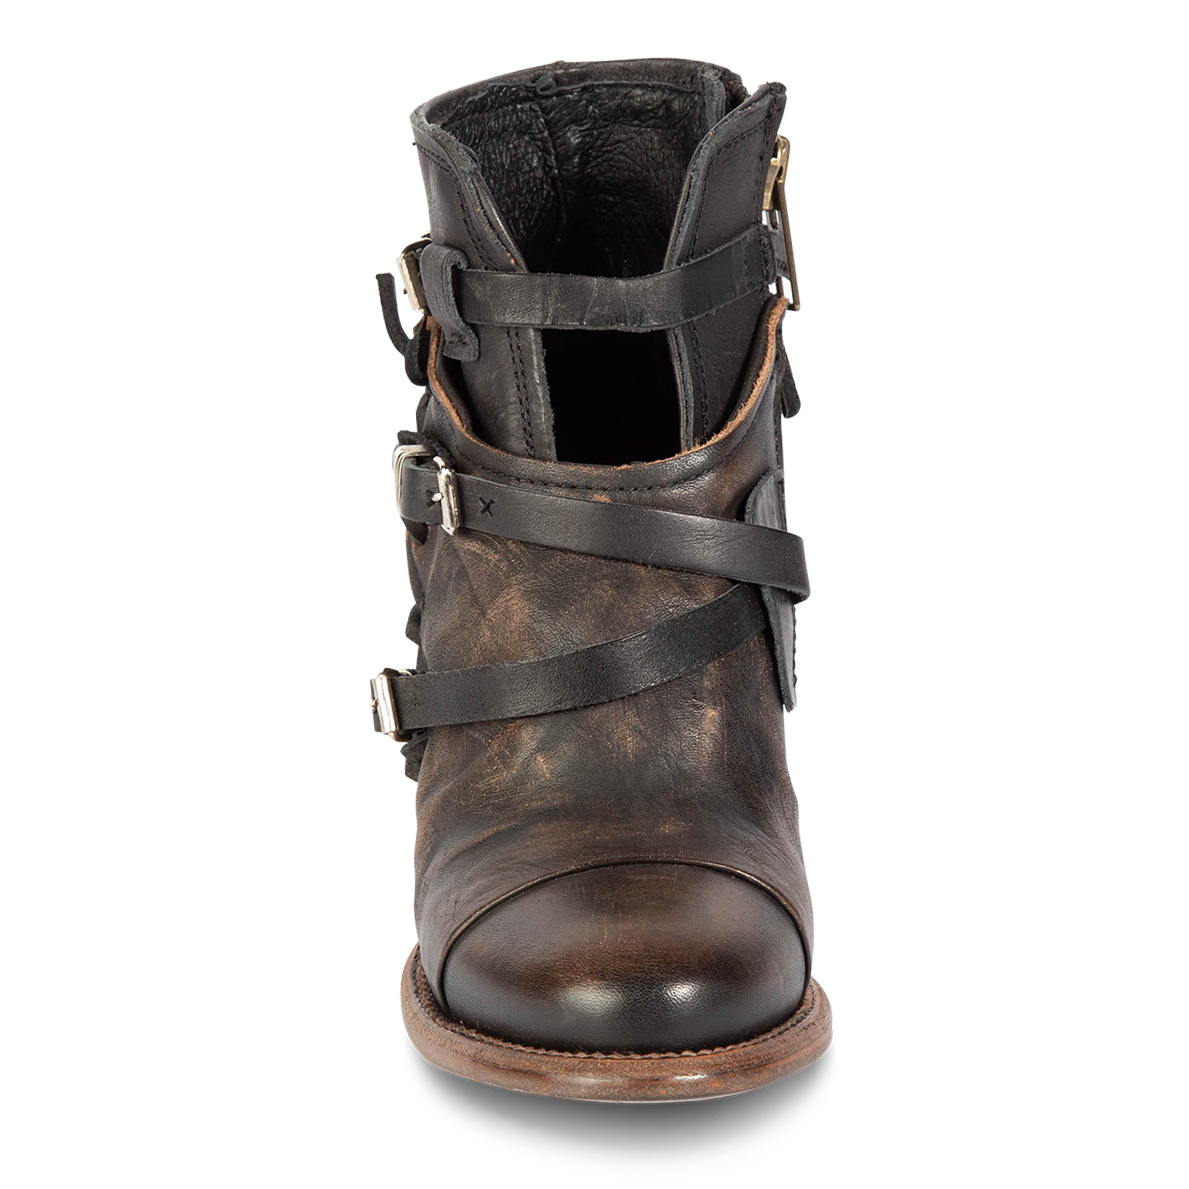 Front view showing cutout and leather ankle straps on FREEBIRD women's Crue black distressed leather bootie